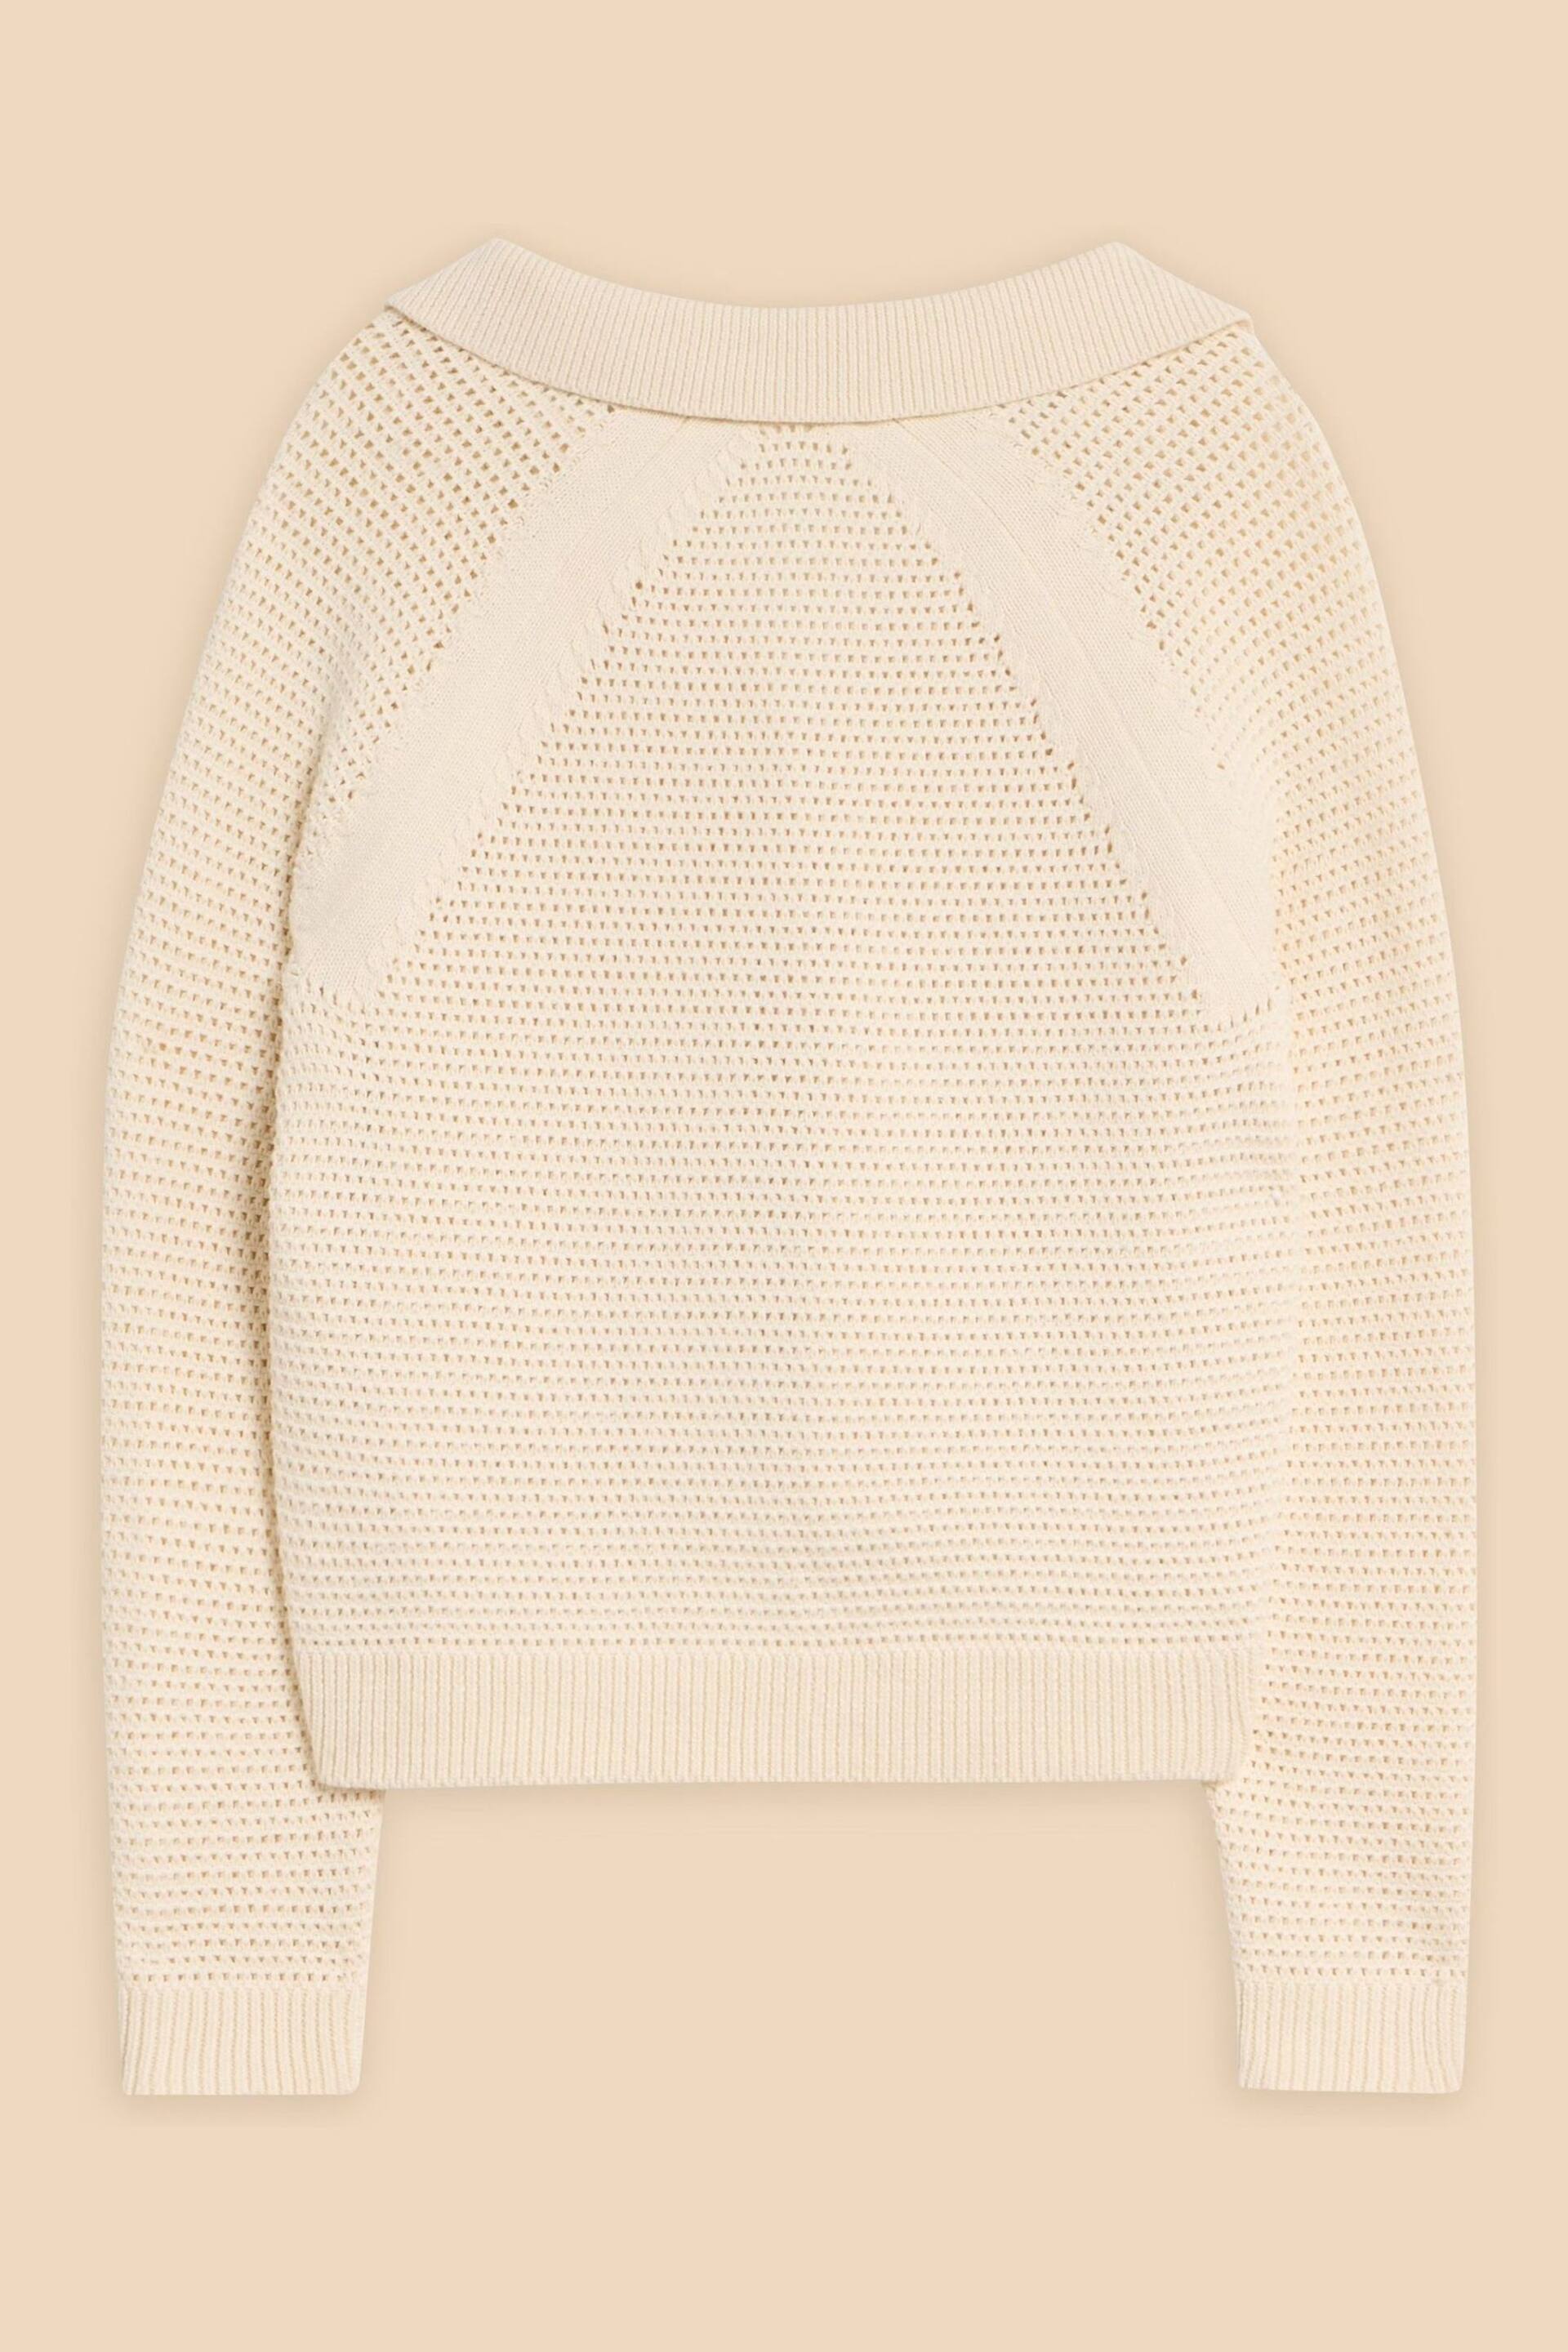 White Stuff Natural Chaterly Crochet Collar Cardigan - Image 6 of 7